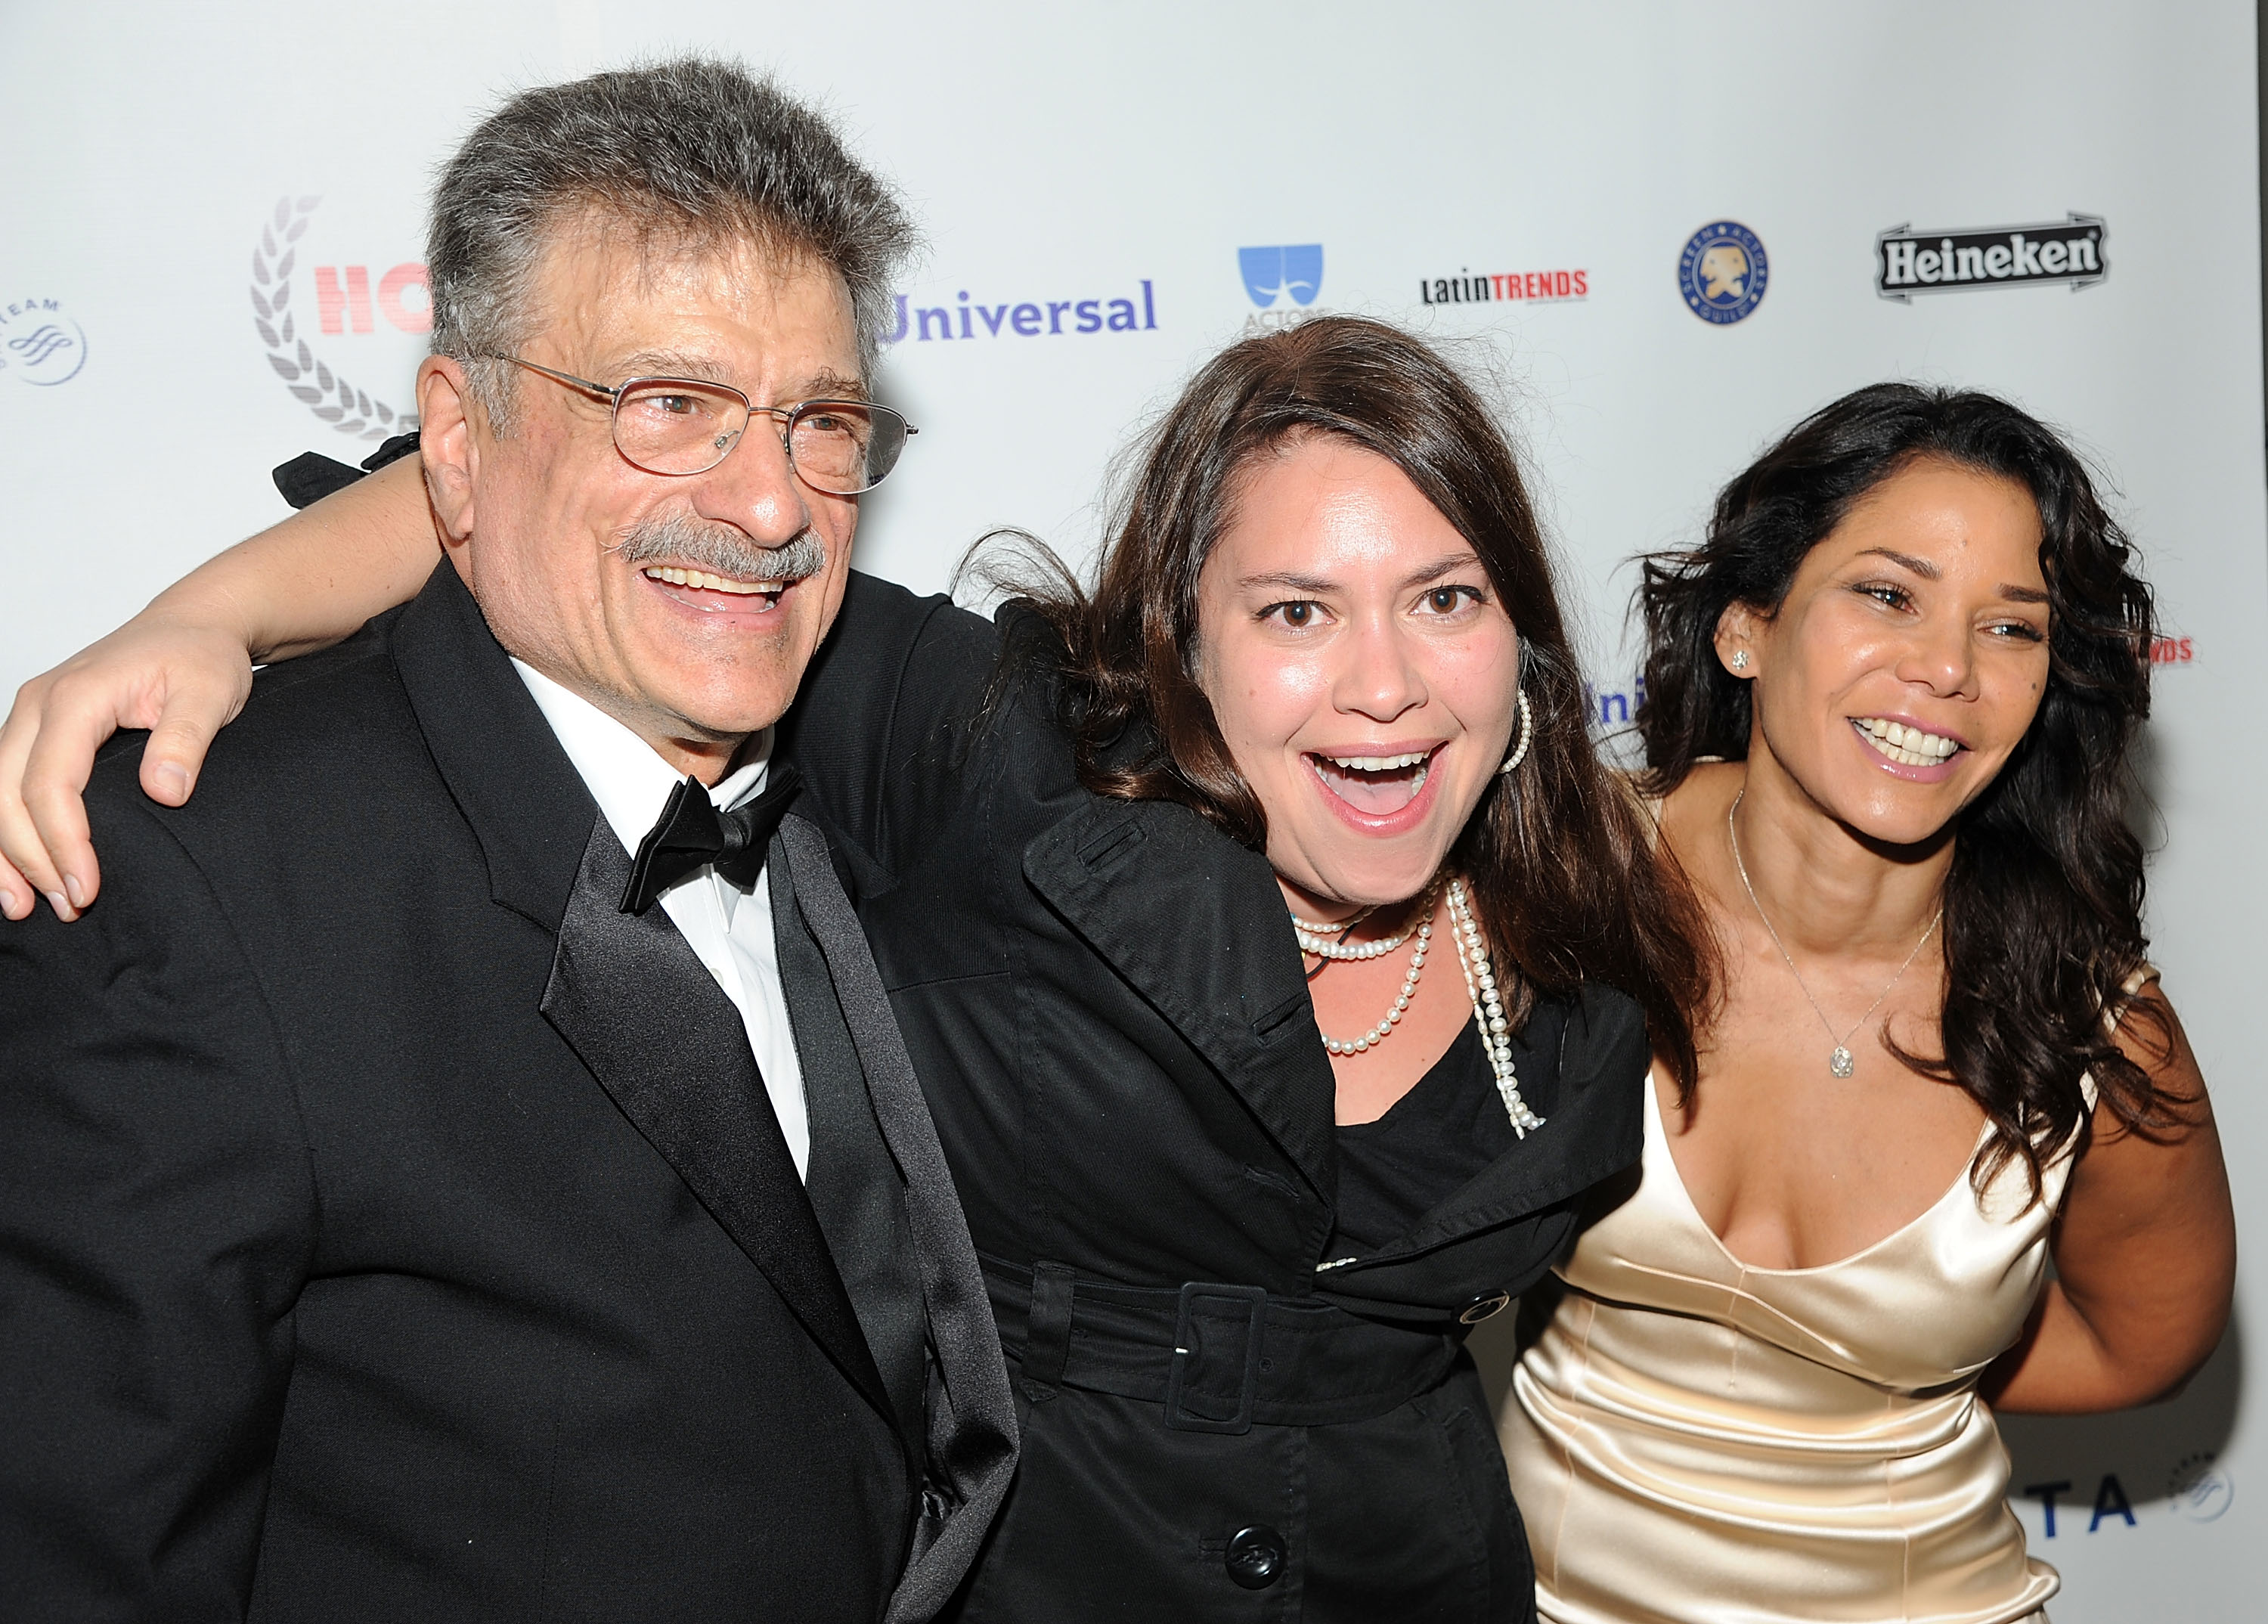 Vanessa Aspillaga (C) recipient of the 2011 HOLA Award for Outstanding Performance by a Female Actor with Daphne Rubin-Vega (R) and Manny Alfaro (L) at the 2011 HOLA Awards Gala at Battery Park on October 17, 2011 in New York City